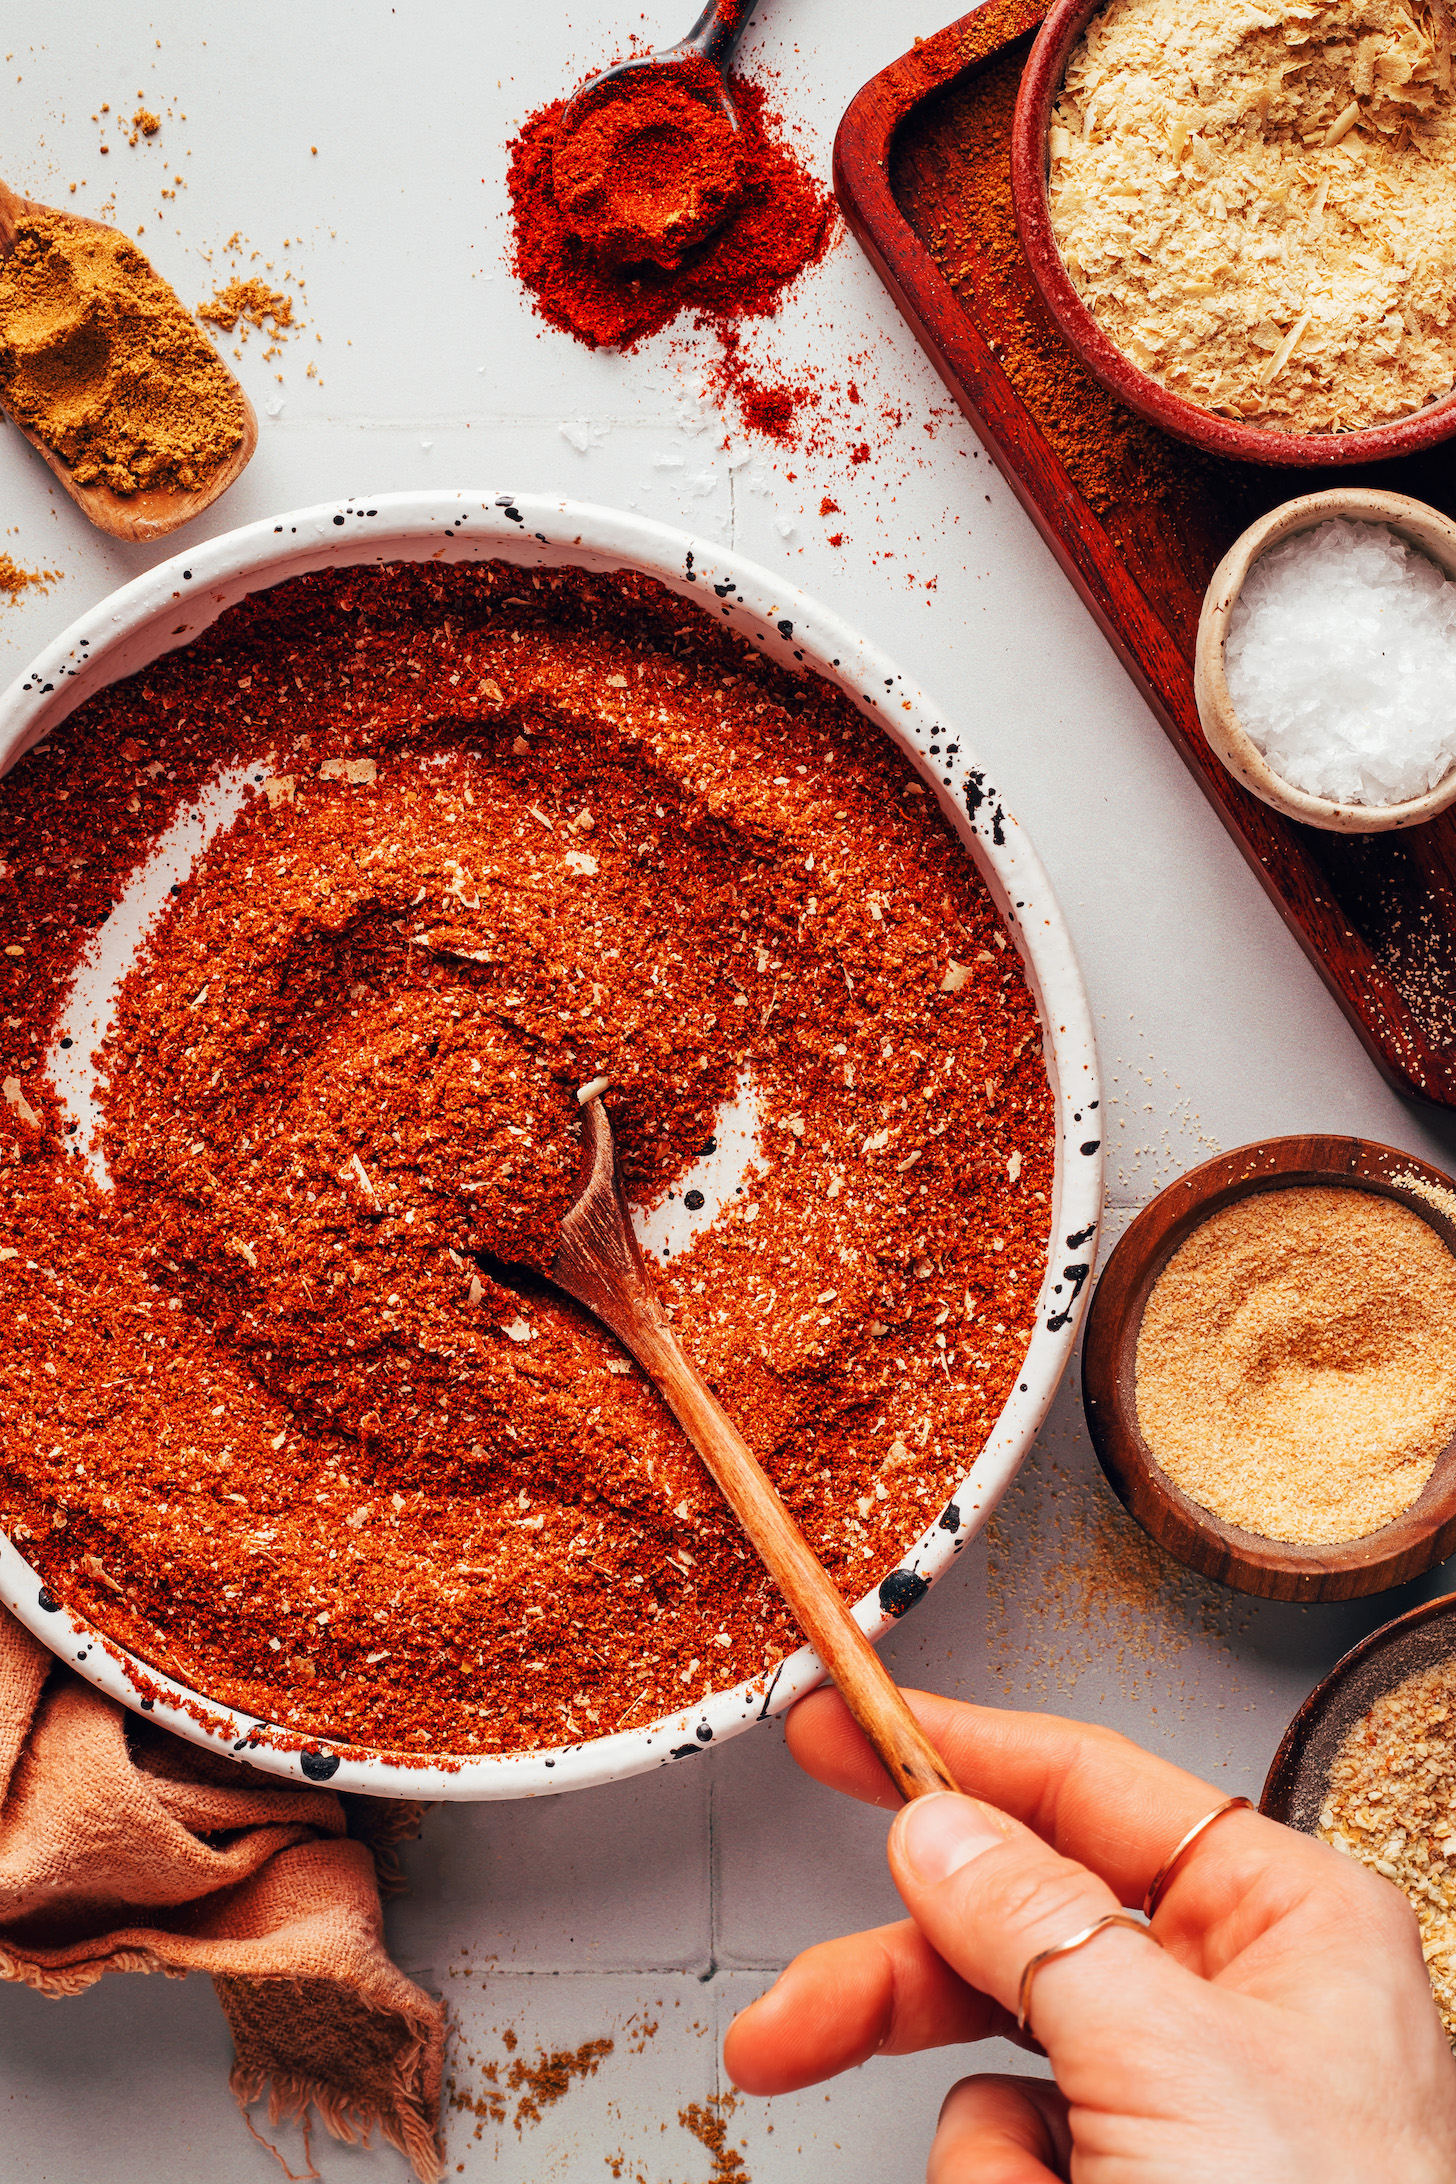 Stirring together spices to make homemade taco seasoning